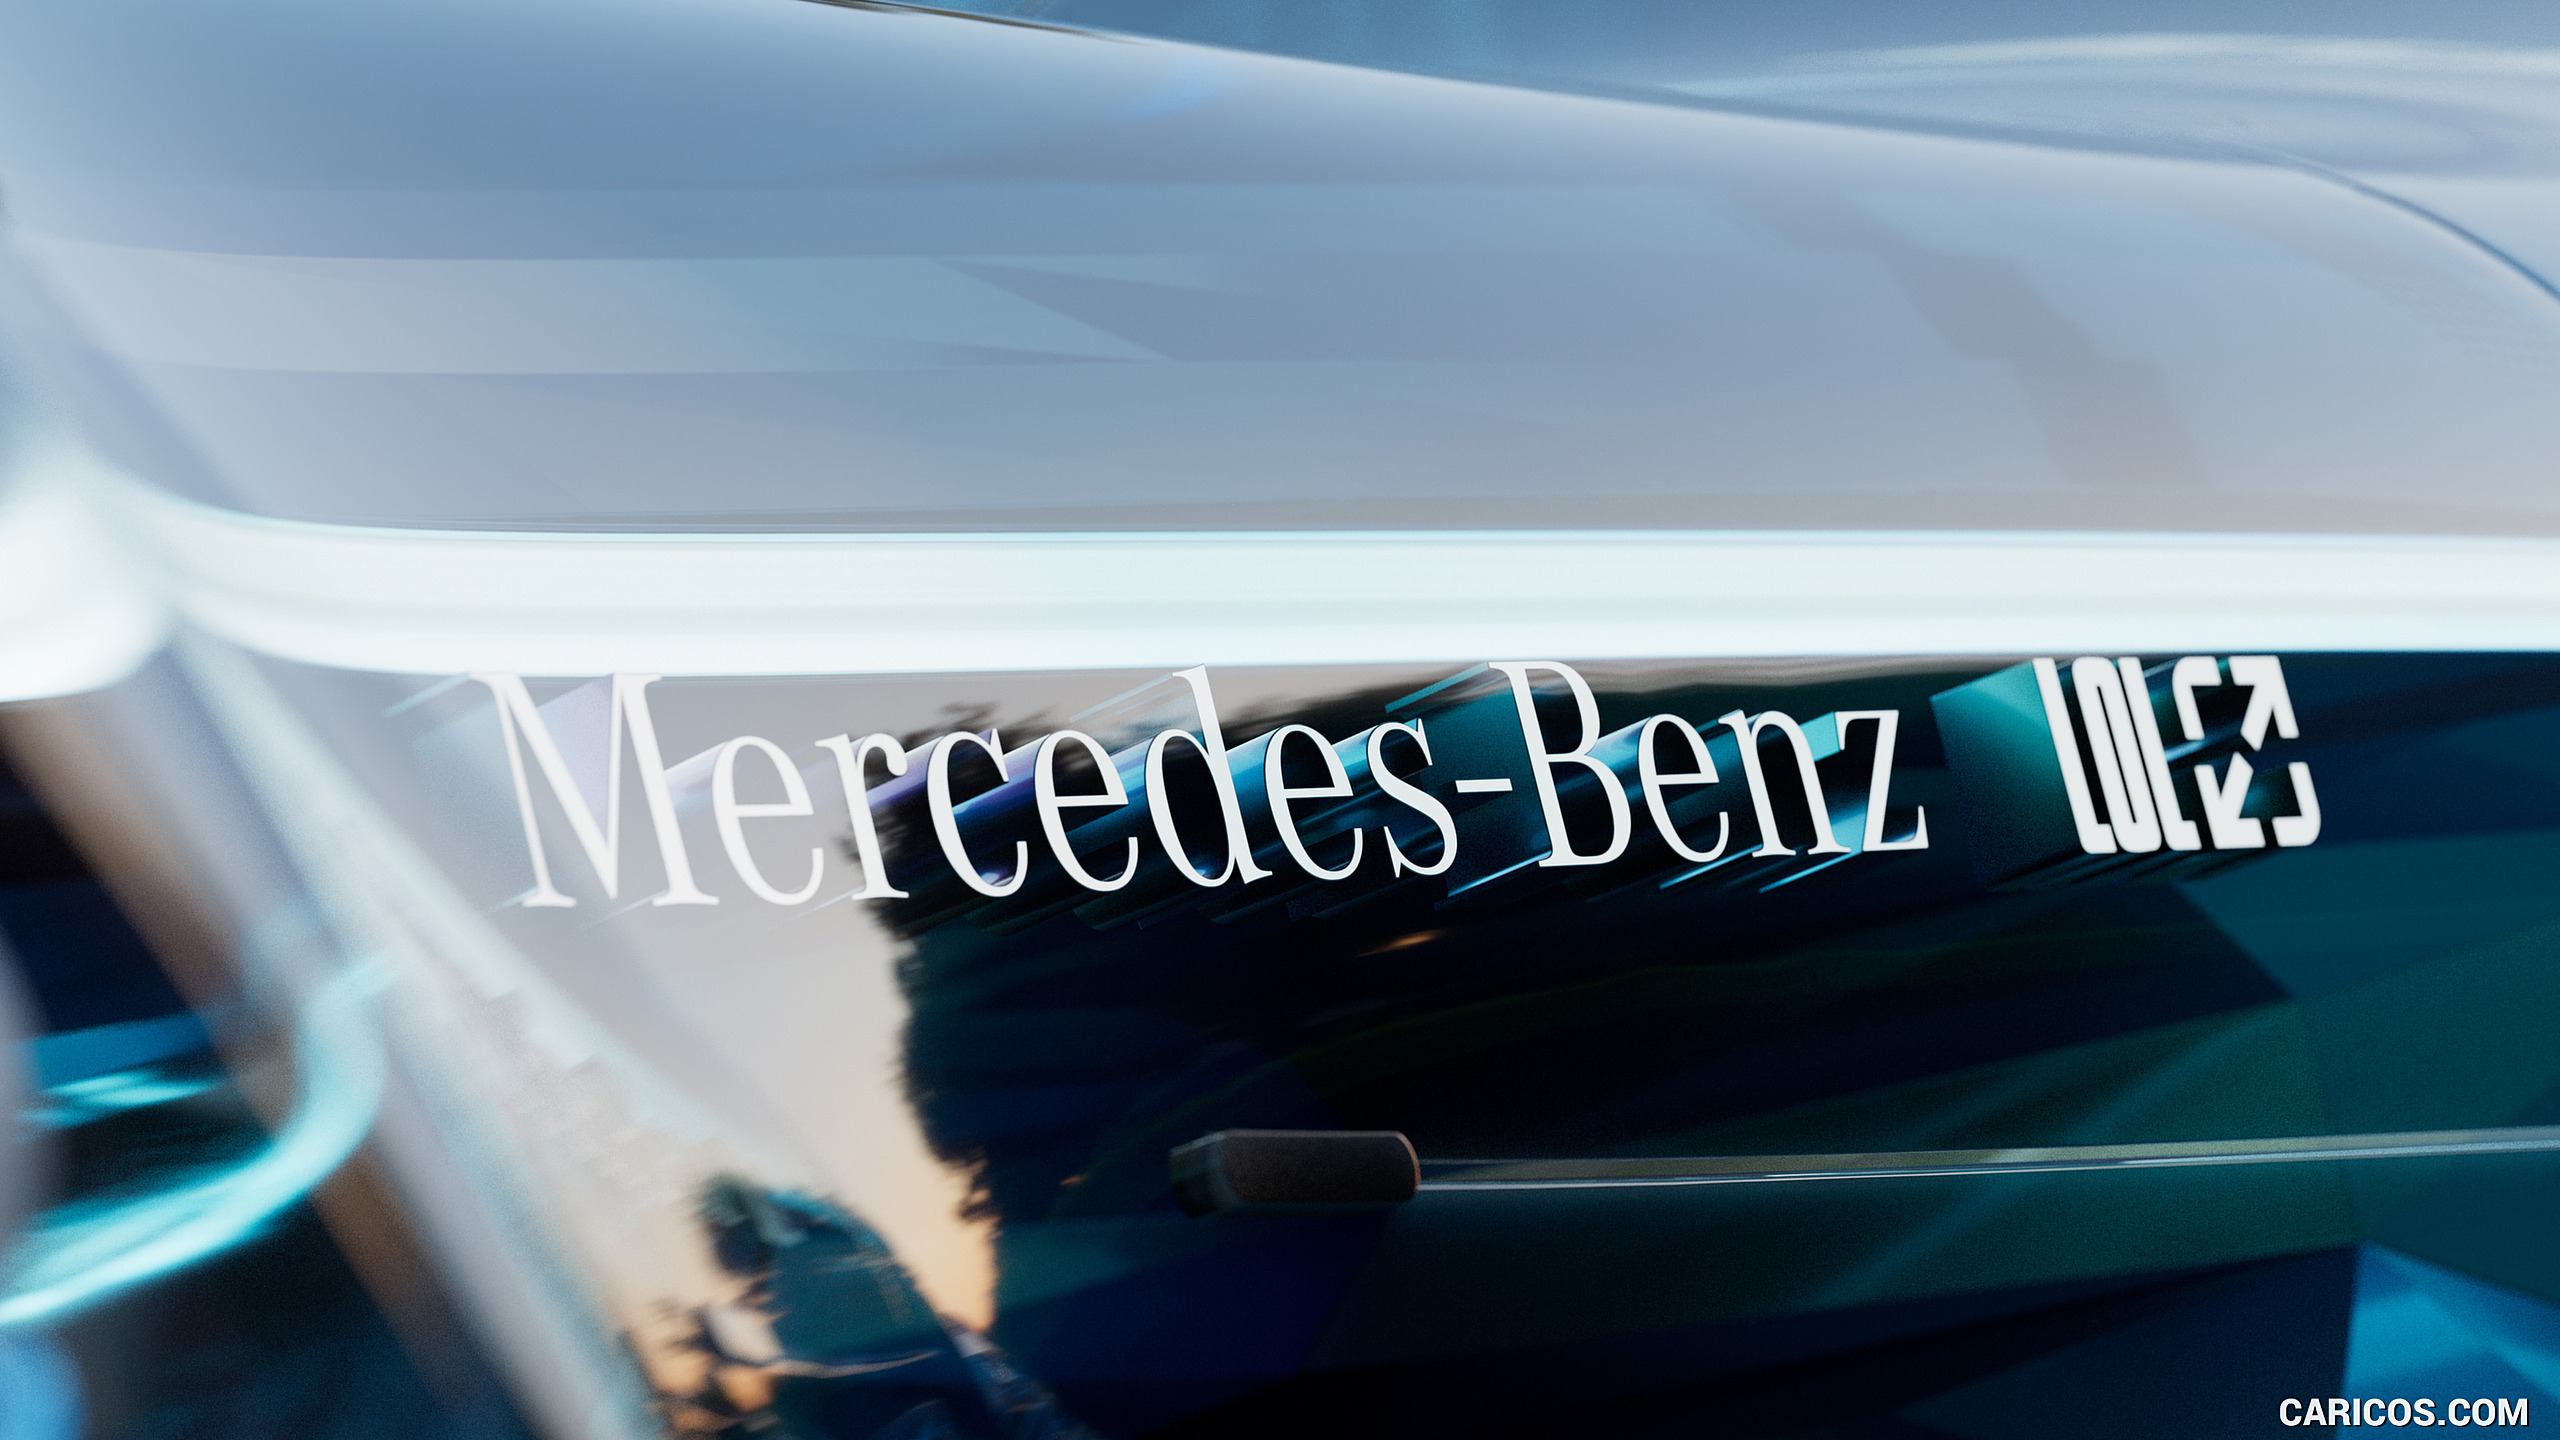 2022 Mercedes-Benz Project SMNR - Detail, #12 of 19